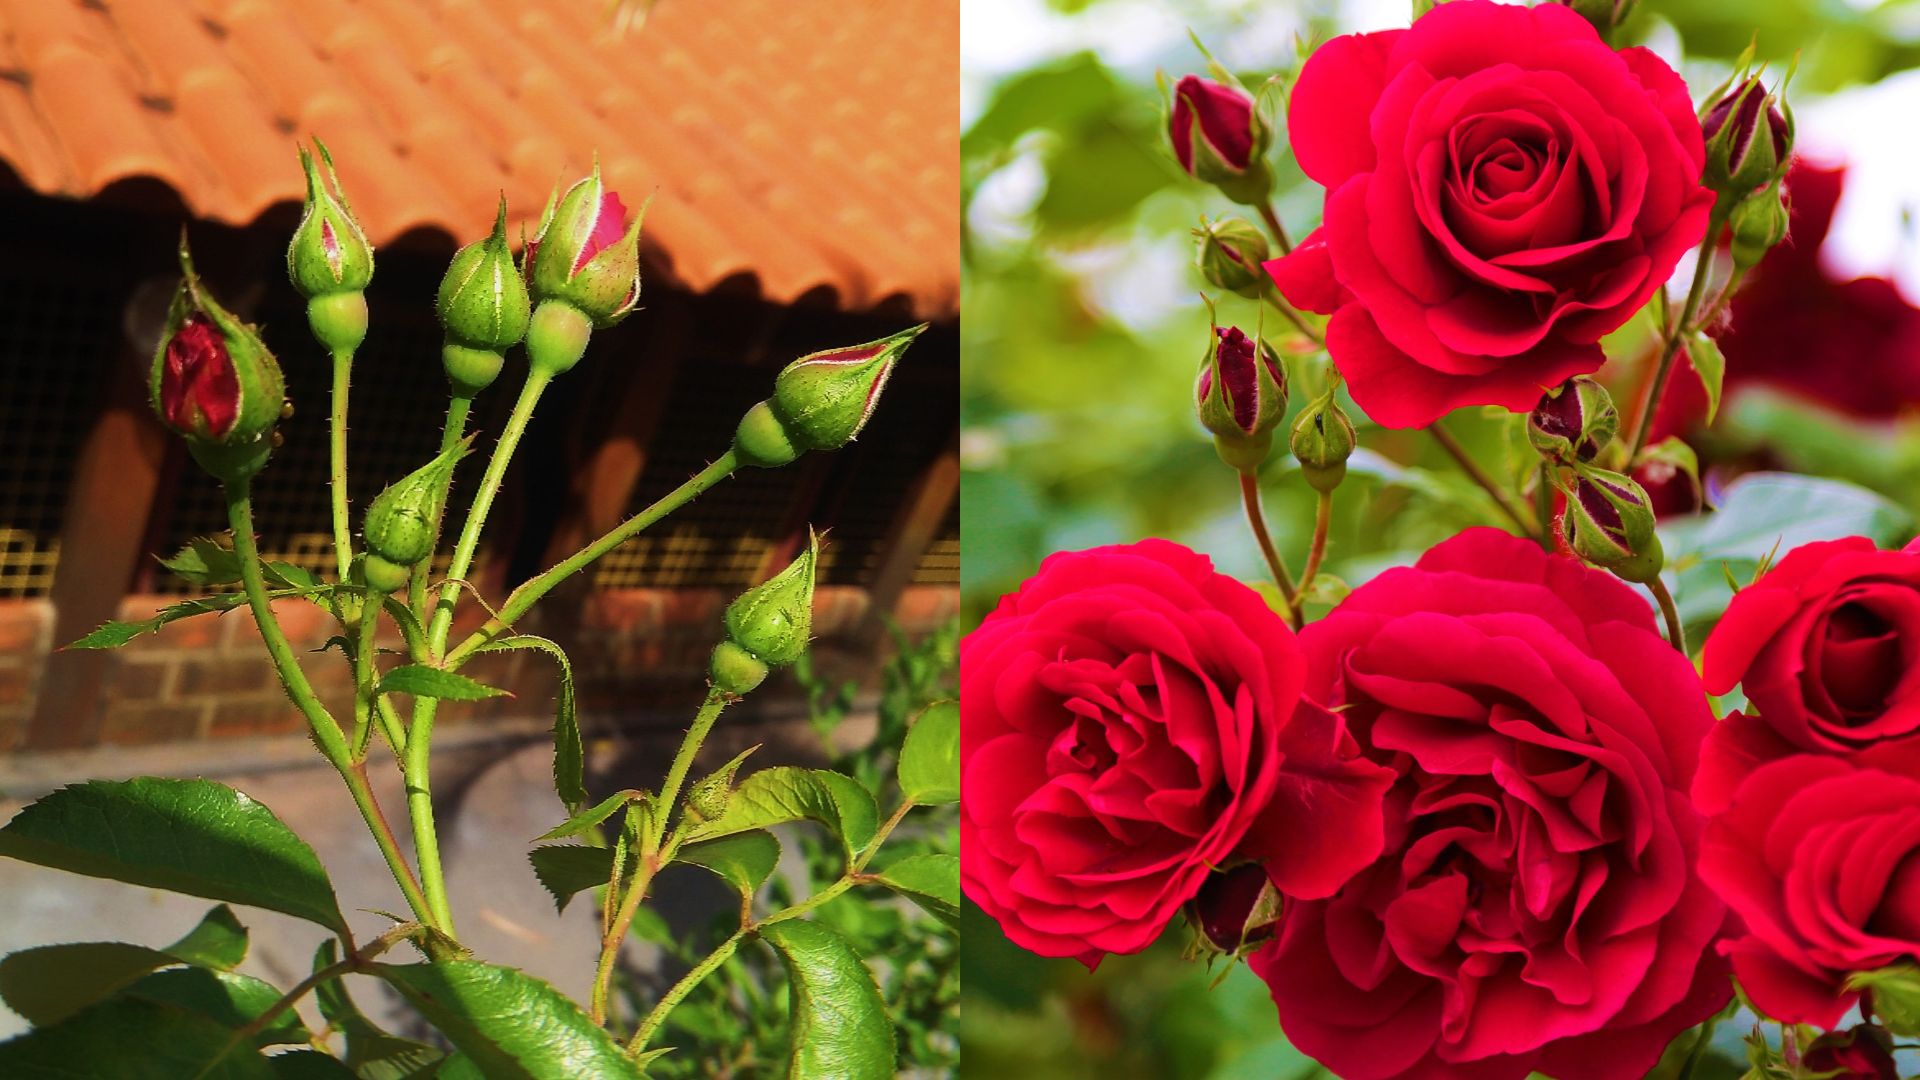 growing red roses from buds